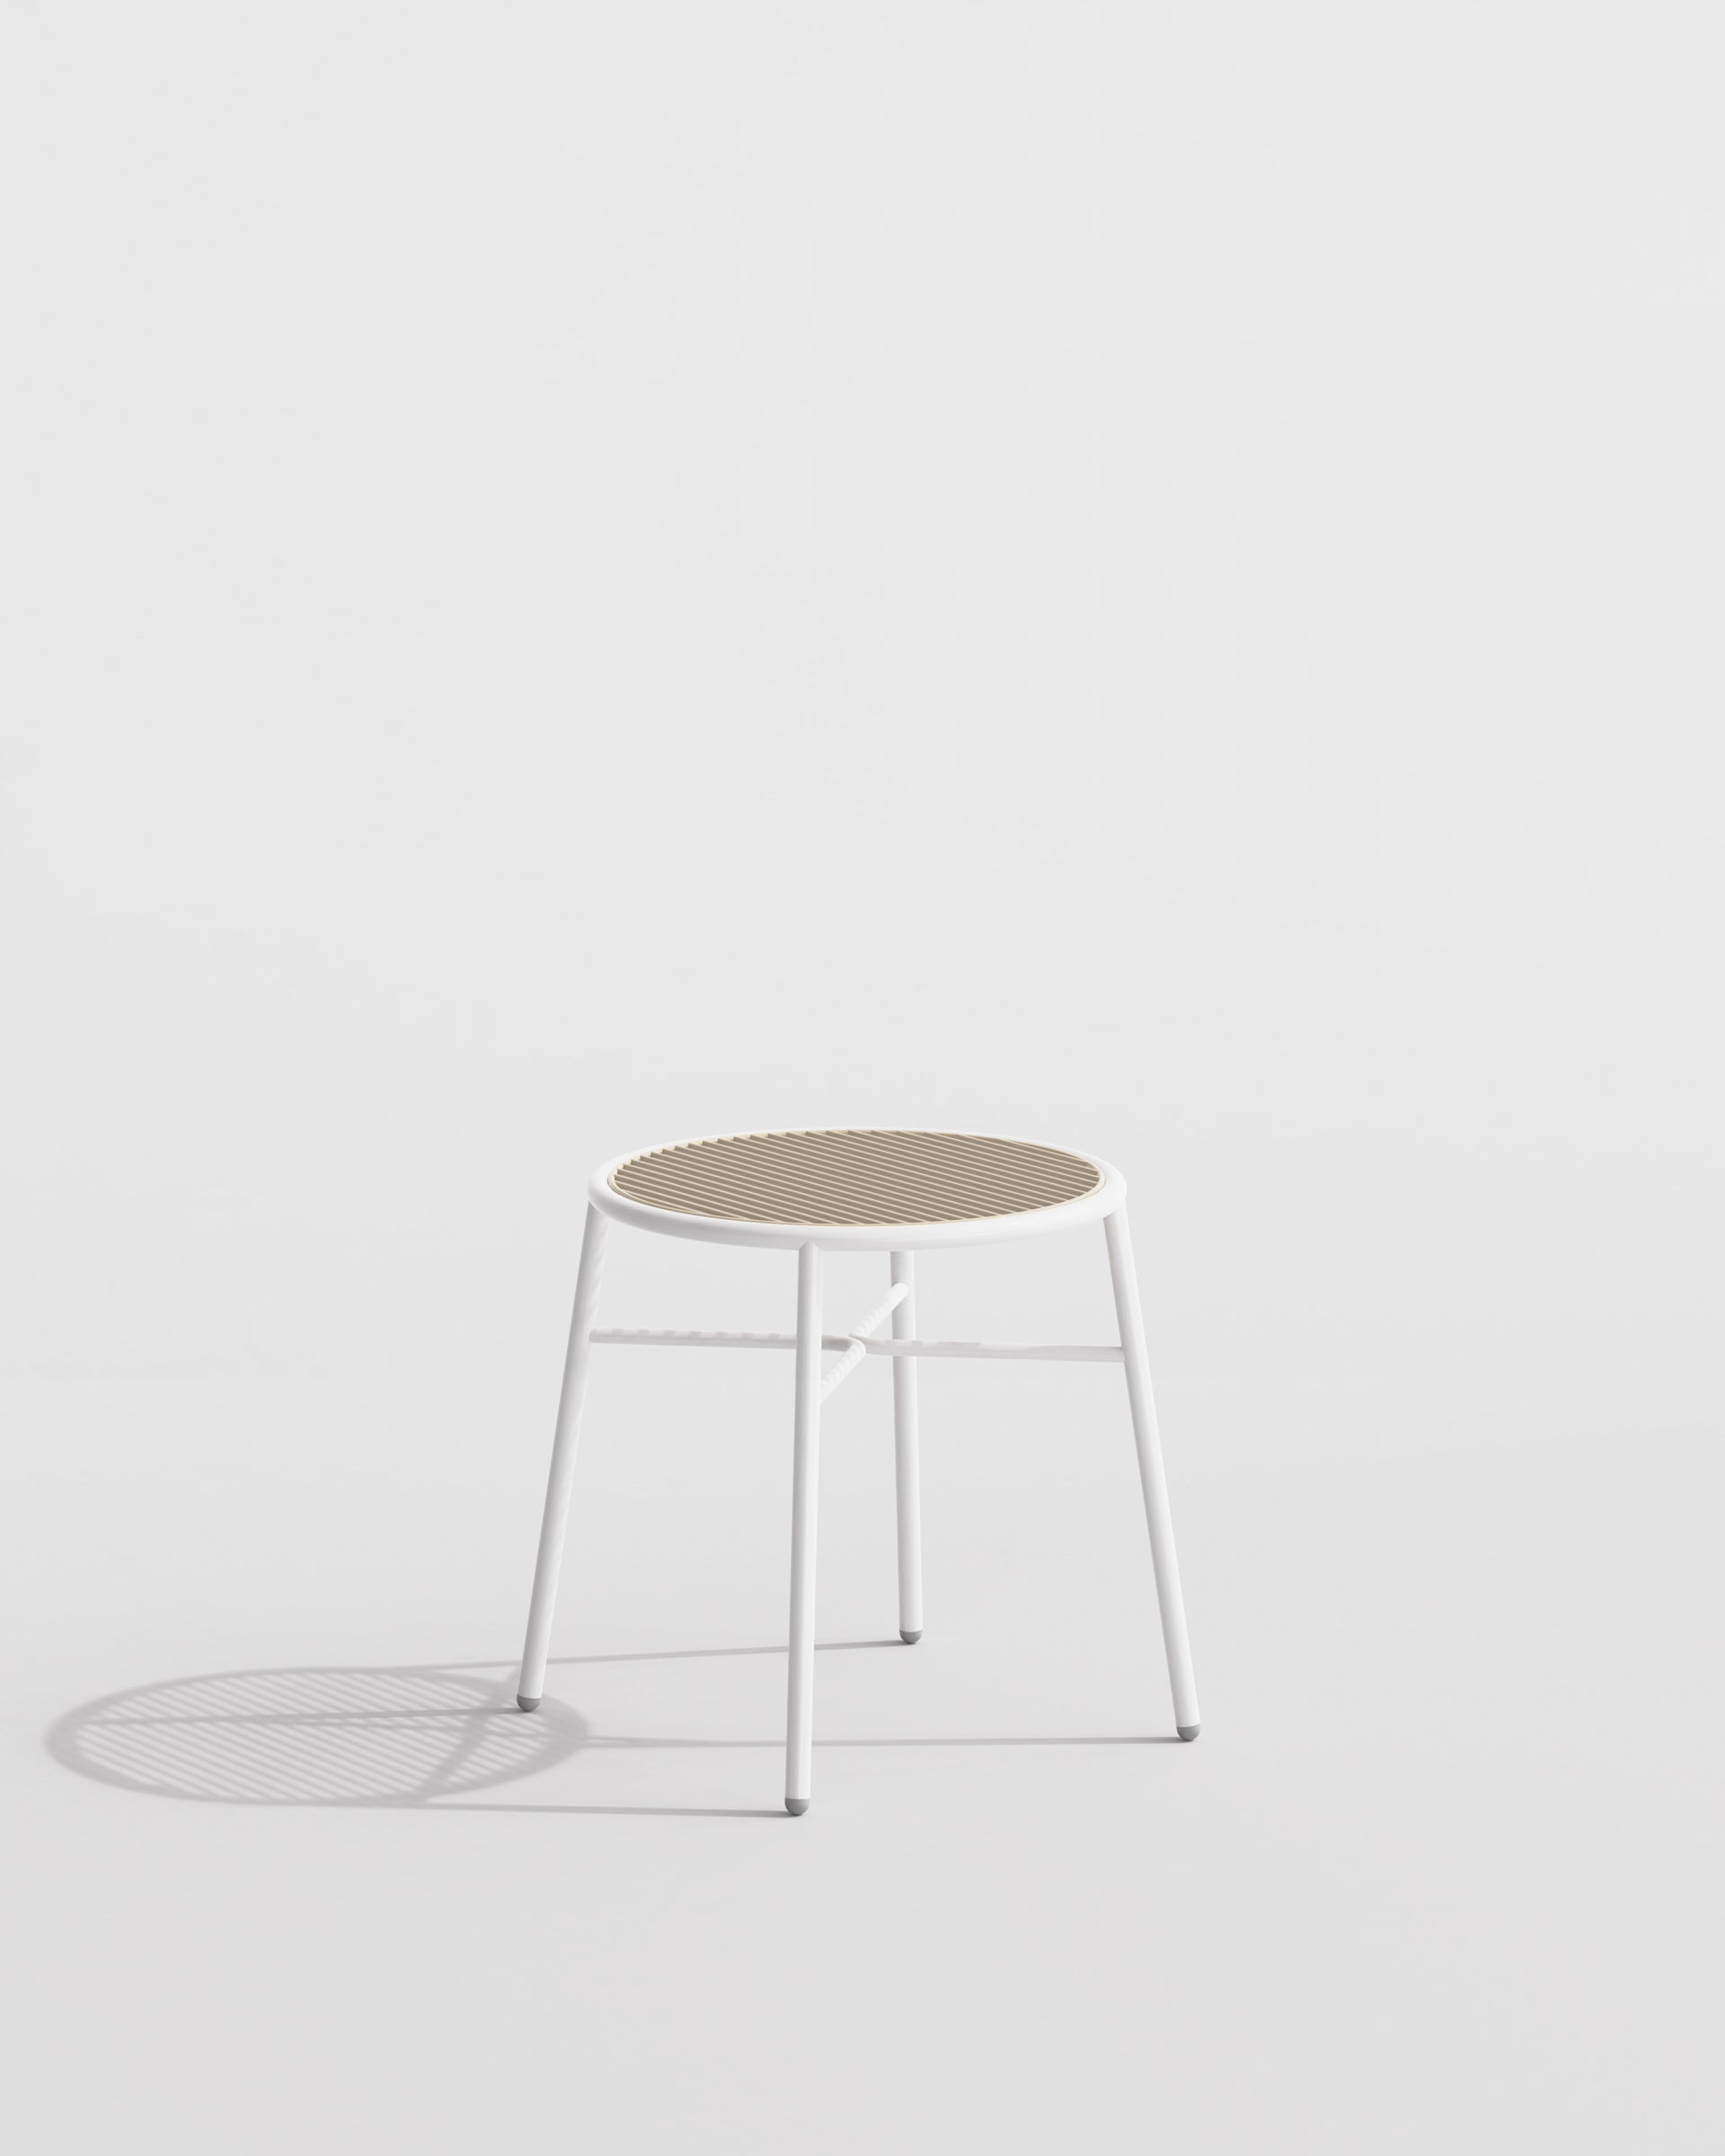 Piper Low Stool | Stackable Outdoor | Designed by GibsonKarlo | DesignByThem